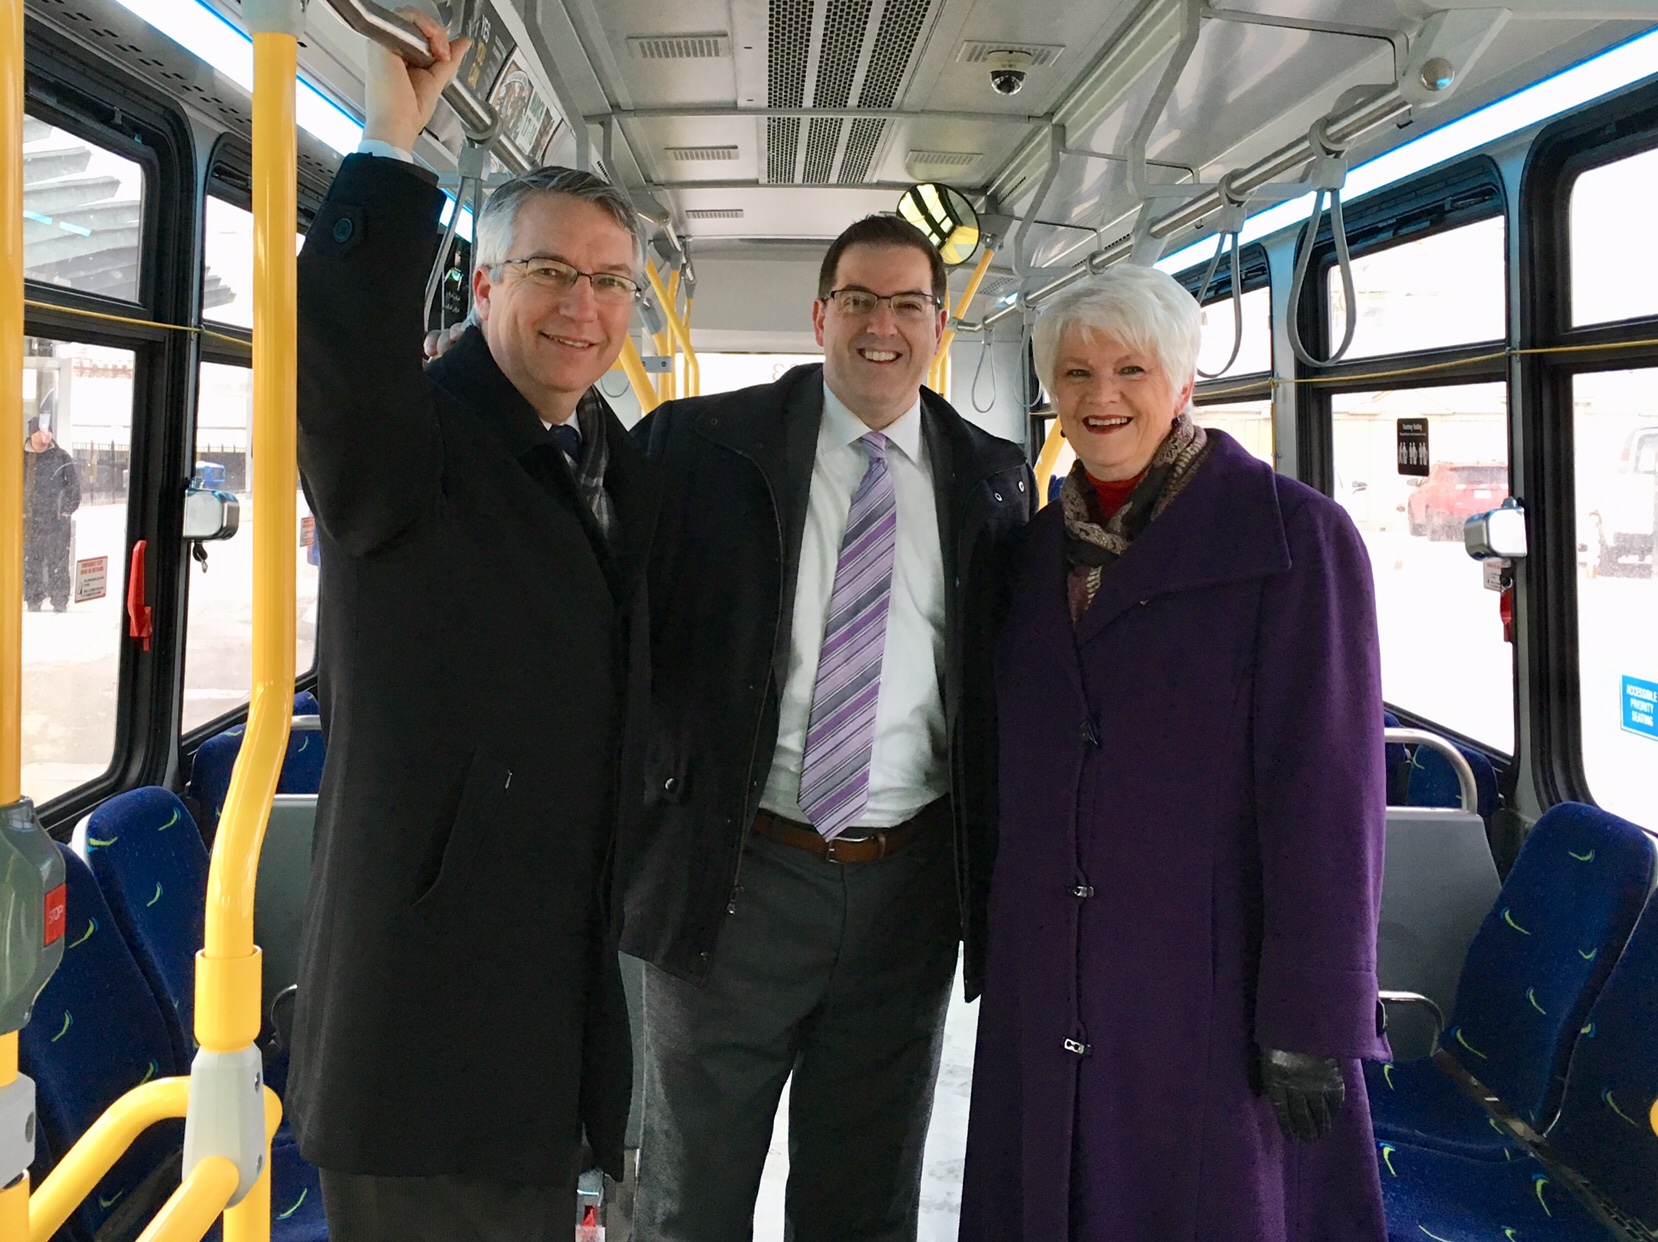 Are You Sitting Down #Guelph? We Just Landed Over $100 Million For Transit!